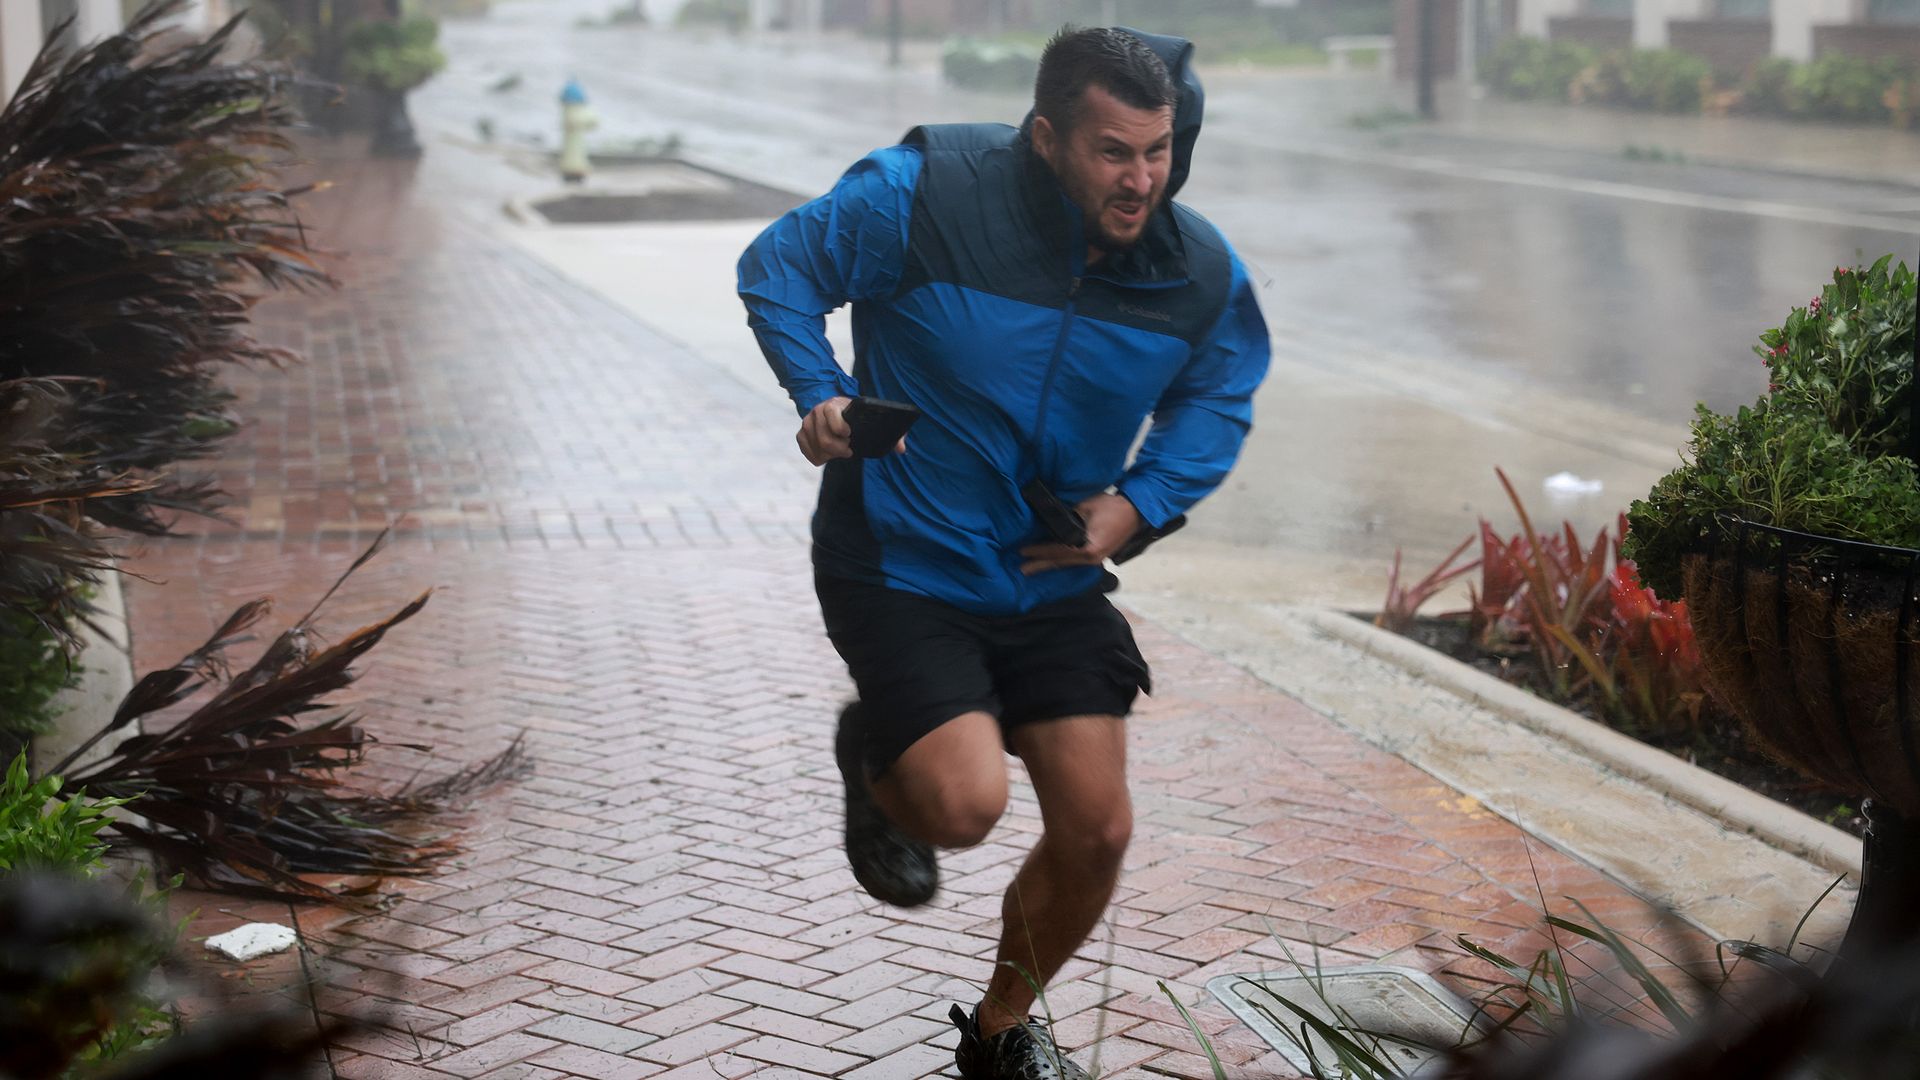 A man runs from stormy conditions.